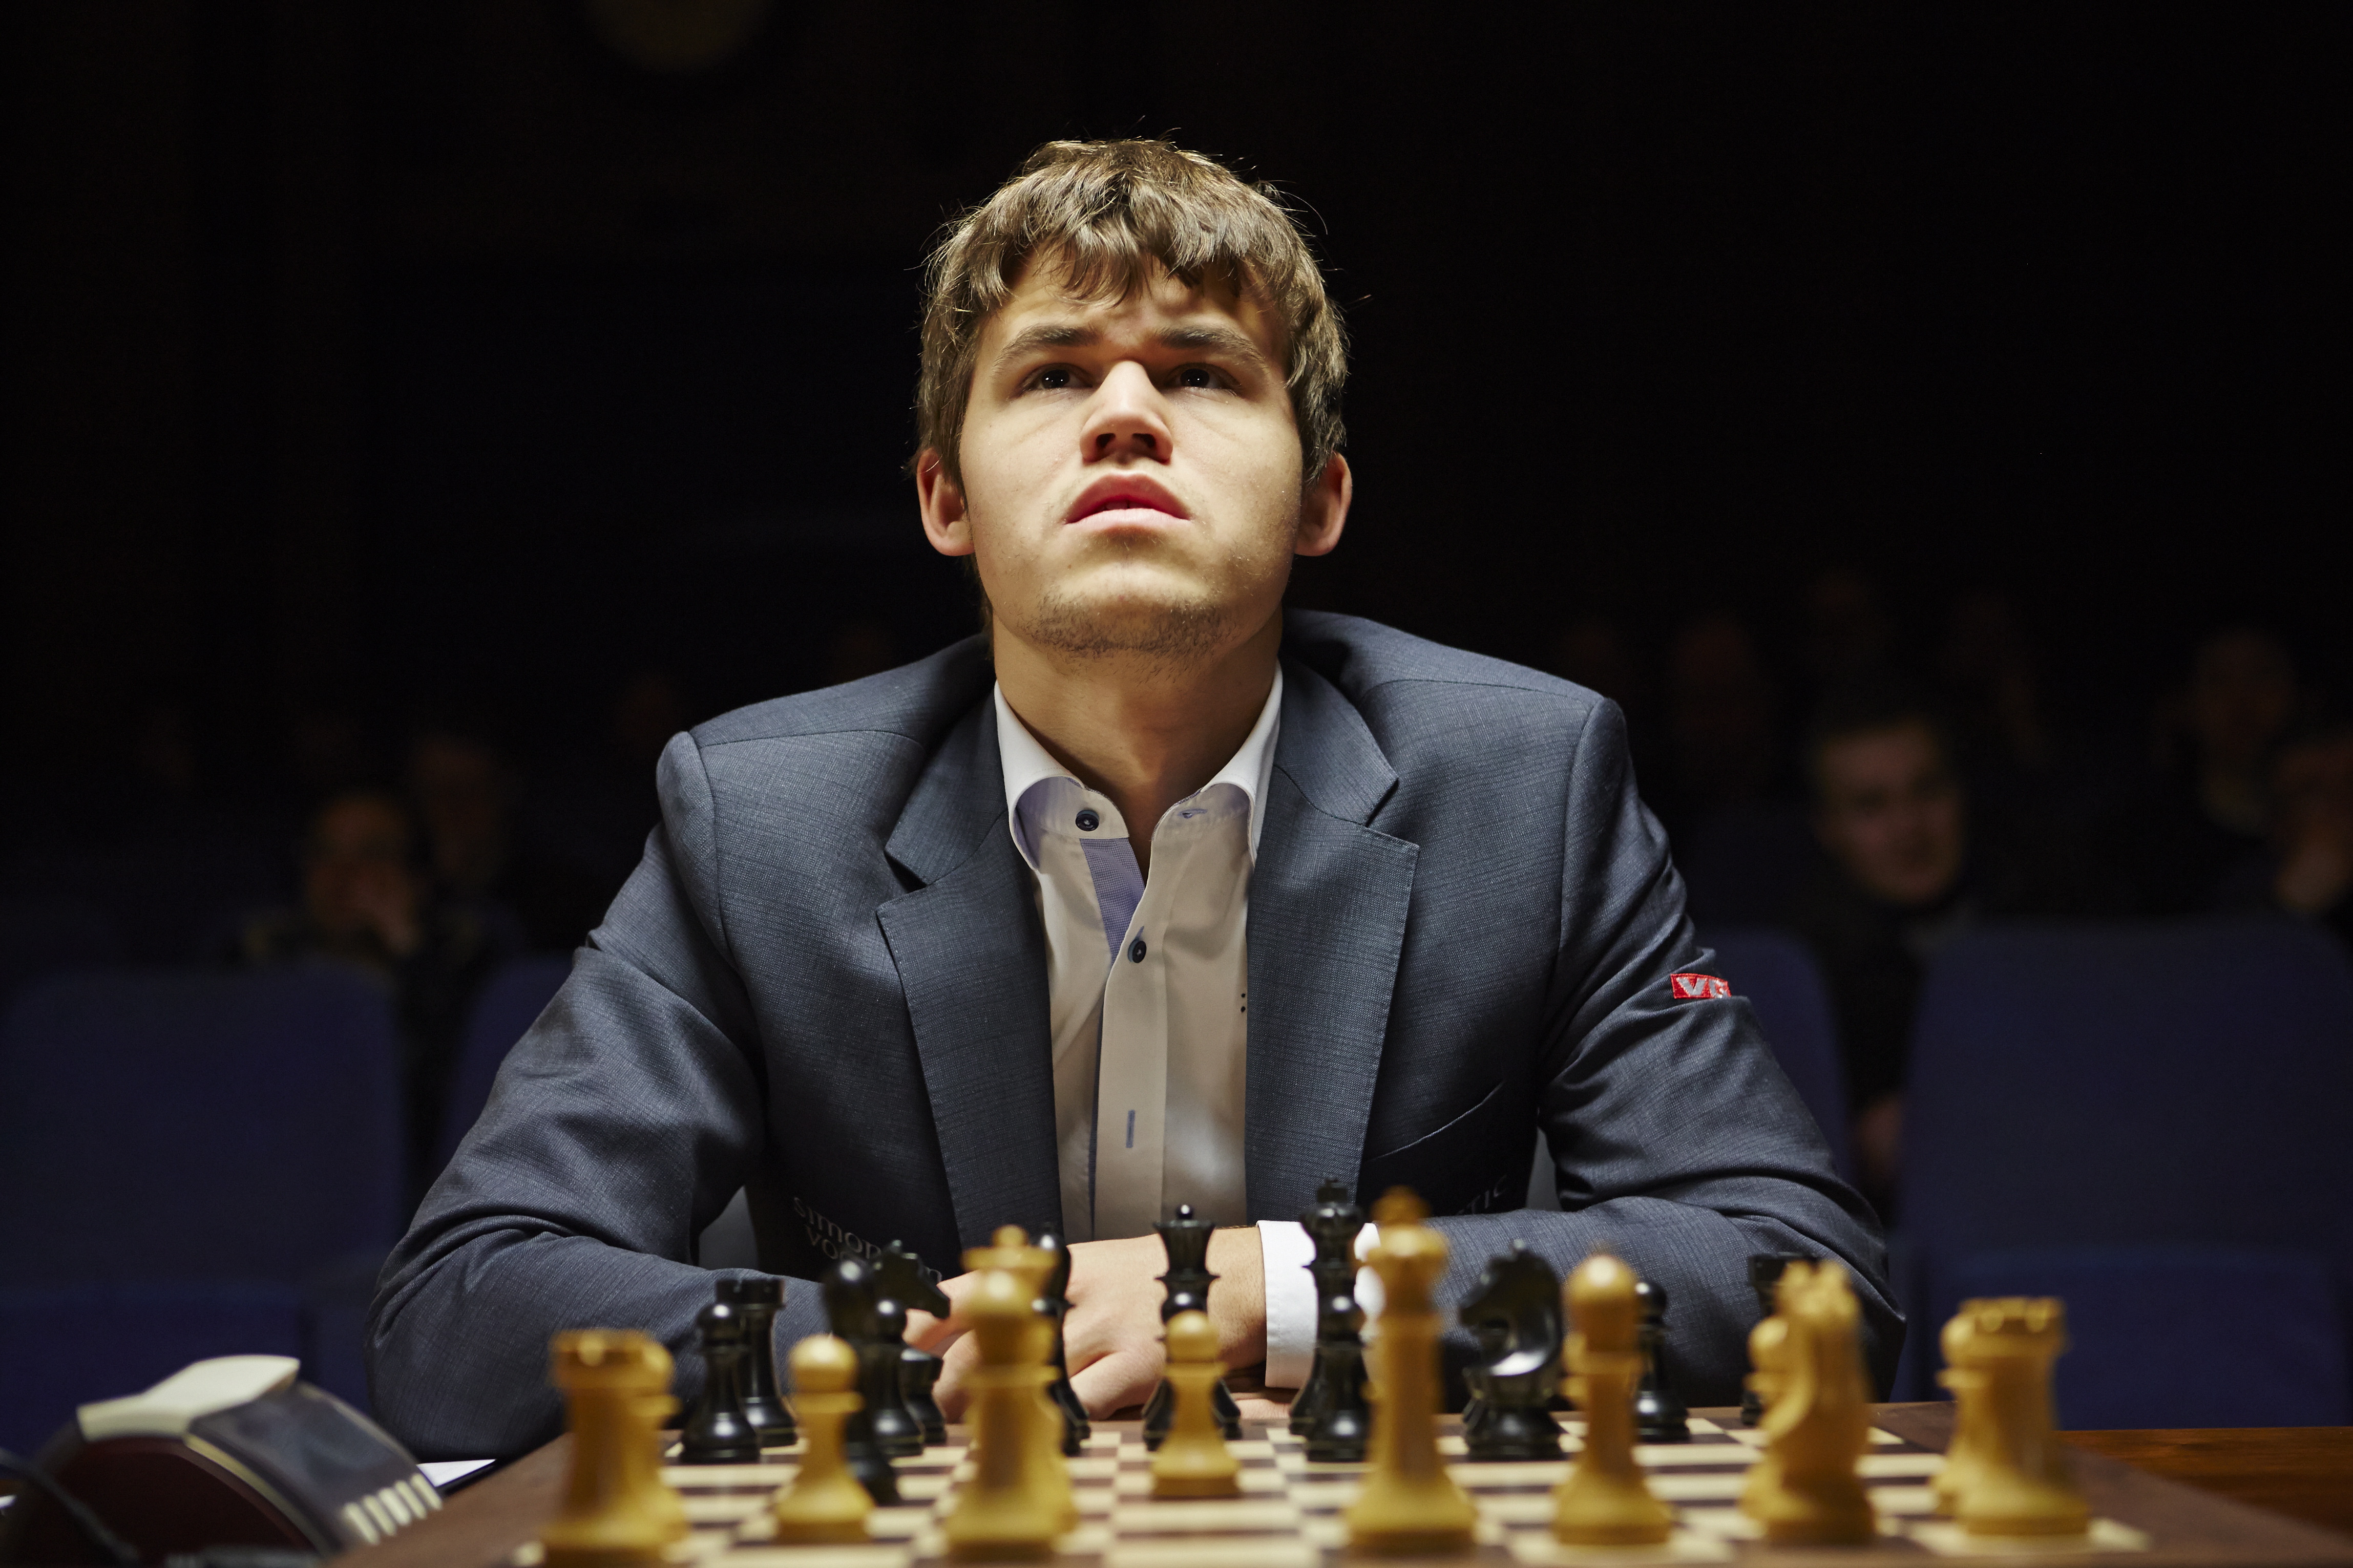 Young Magnus Carlsen The chess prodigy